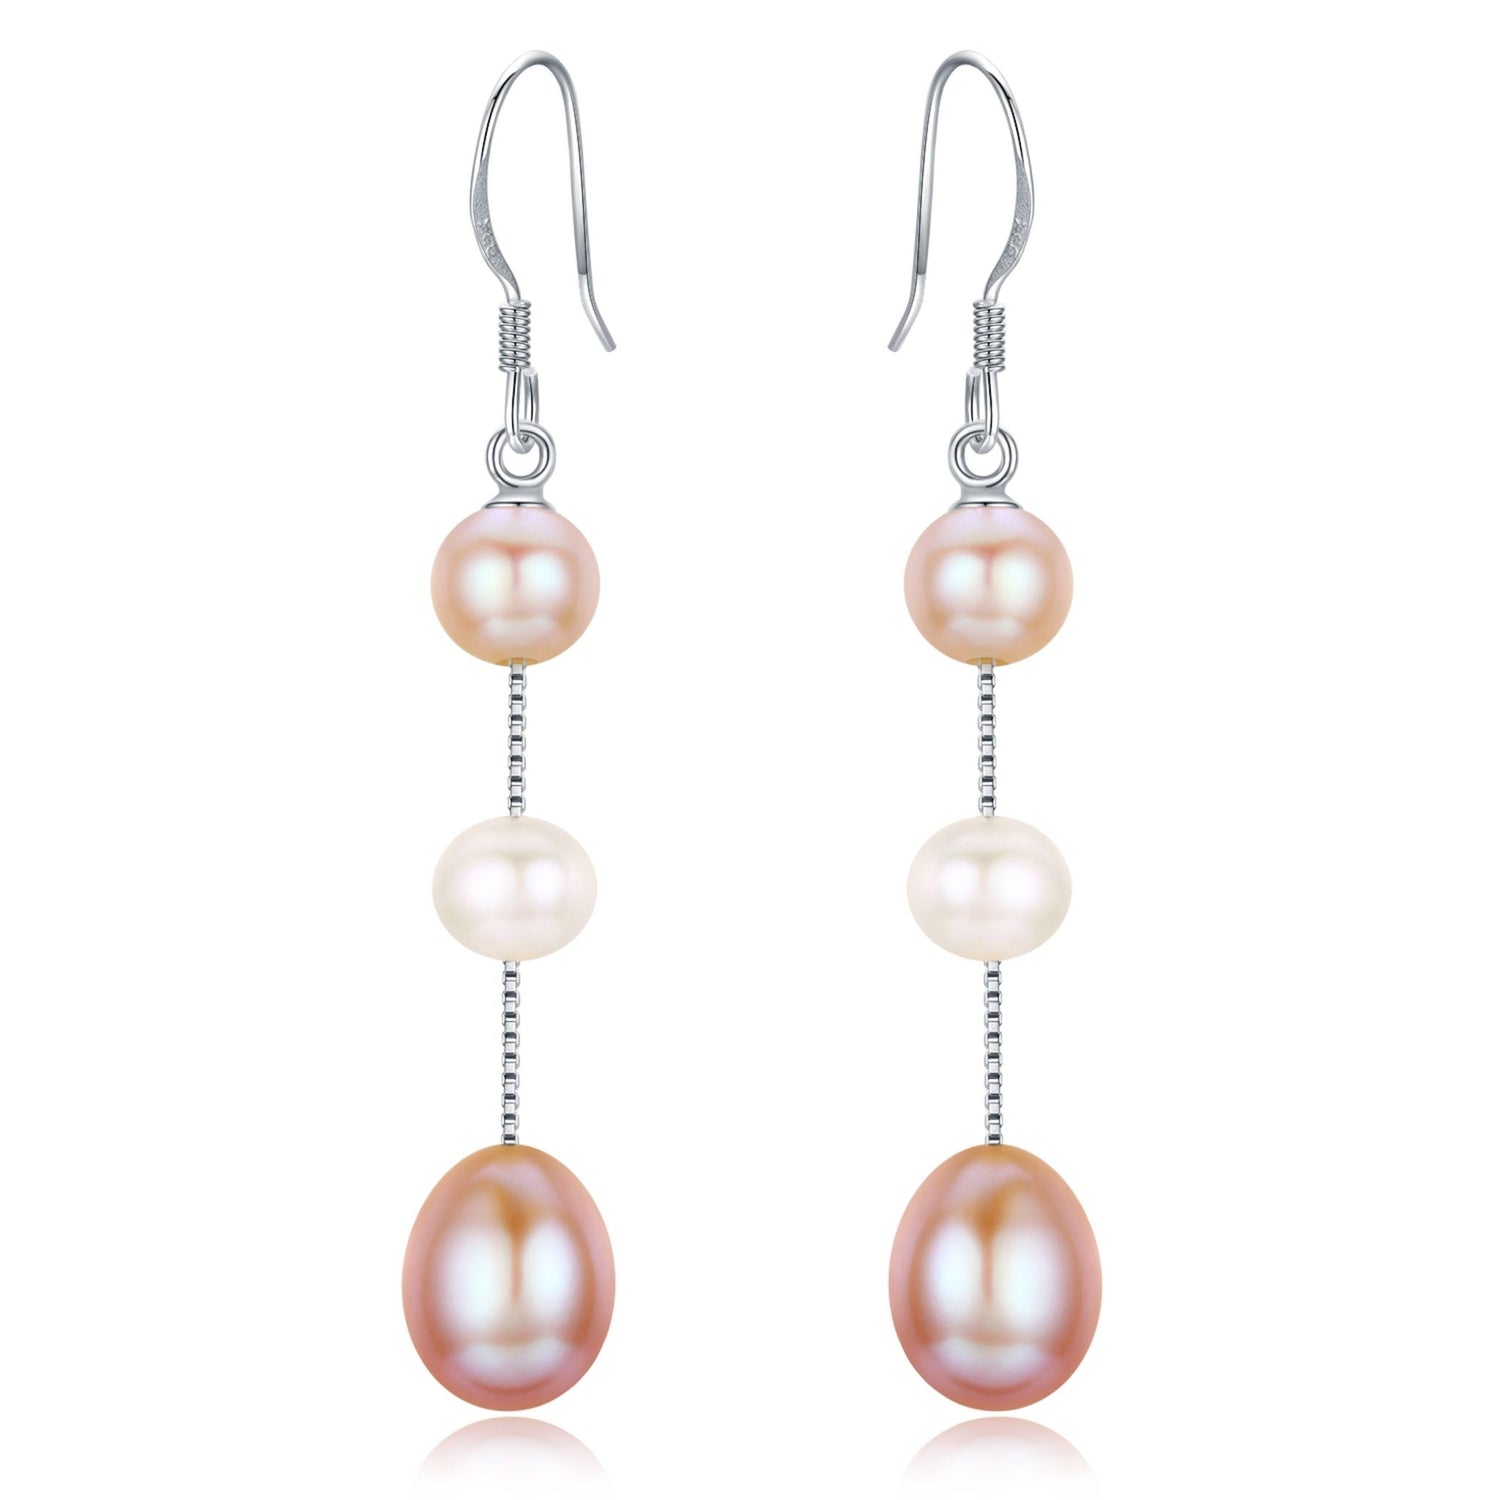 Colorful Drops Earrings - Timeless Pearl